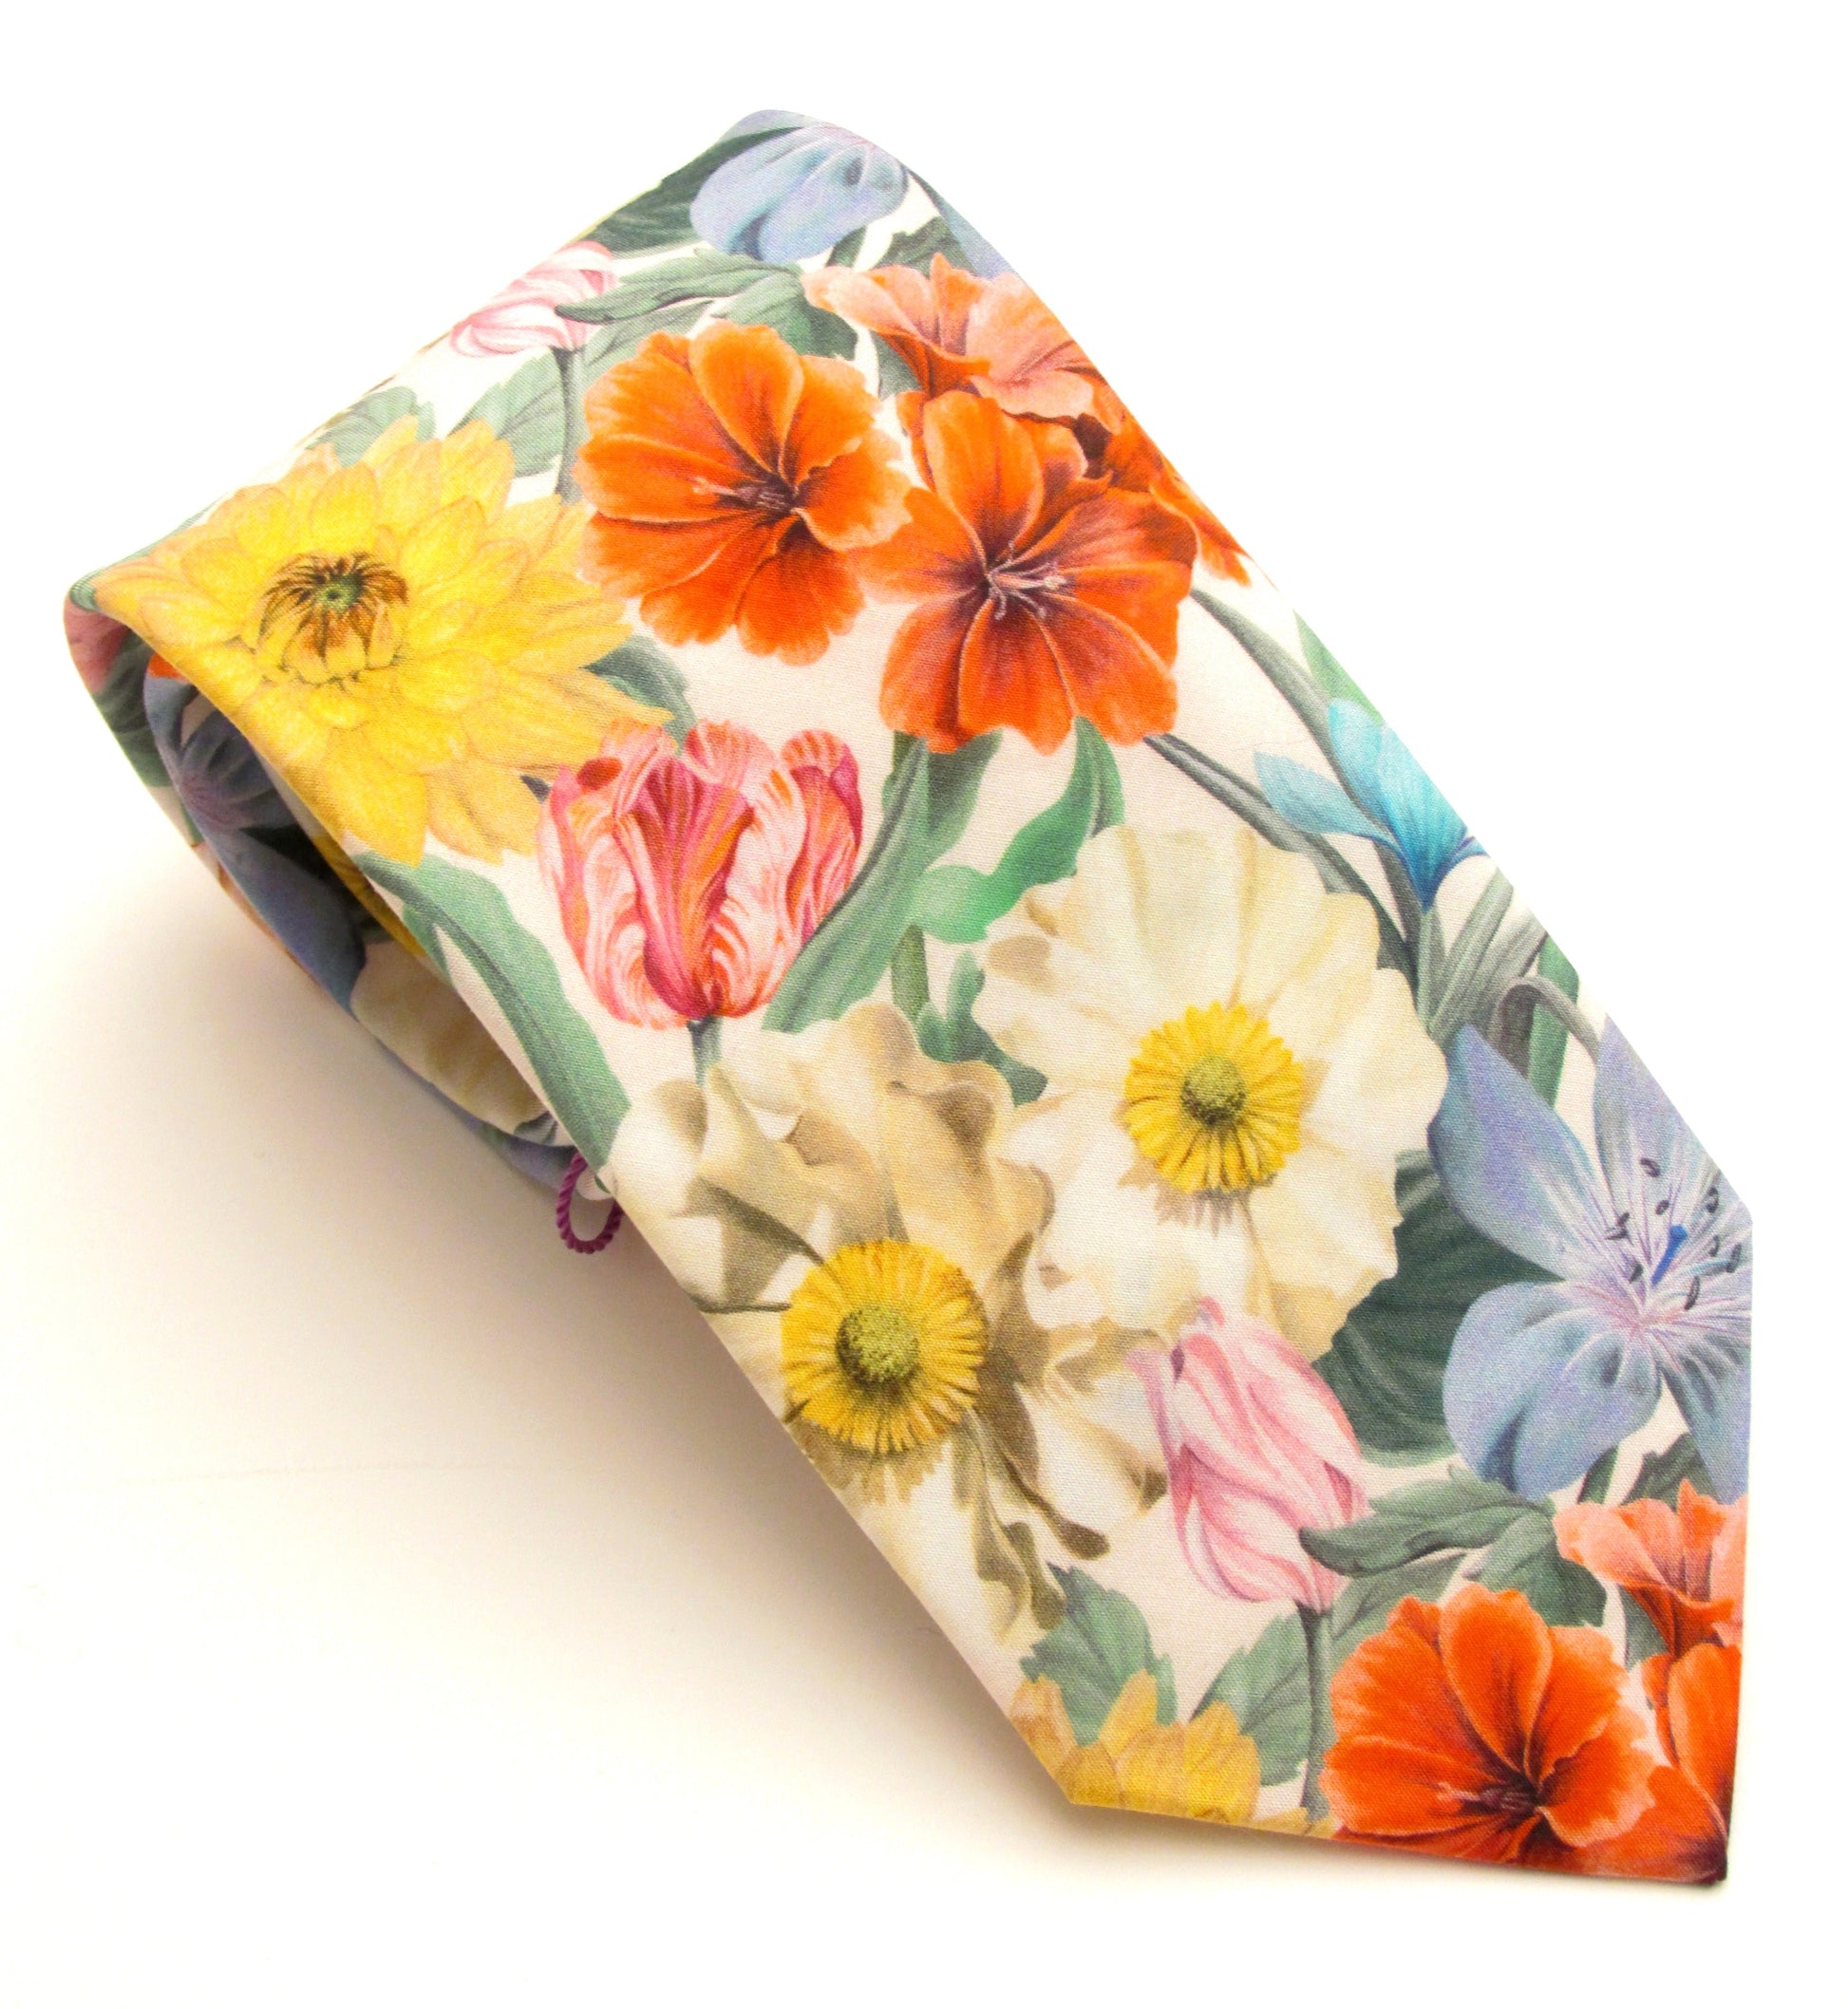 Meadow Melody Cotton Tie Made with Liberty Fabric